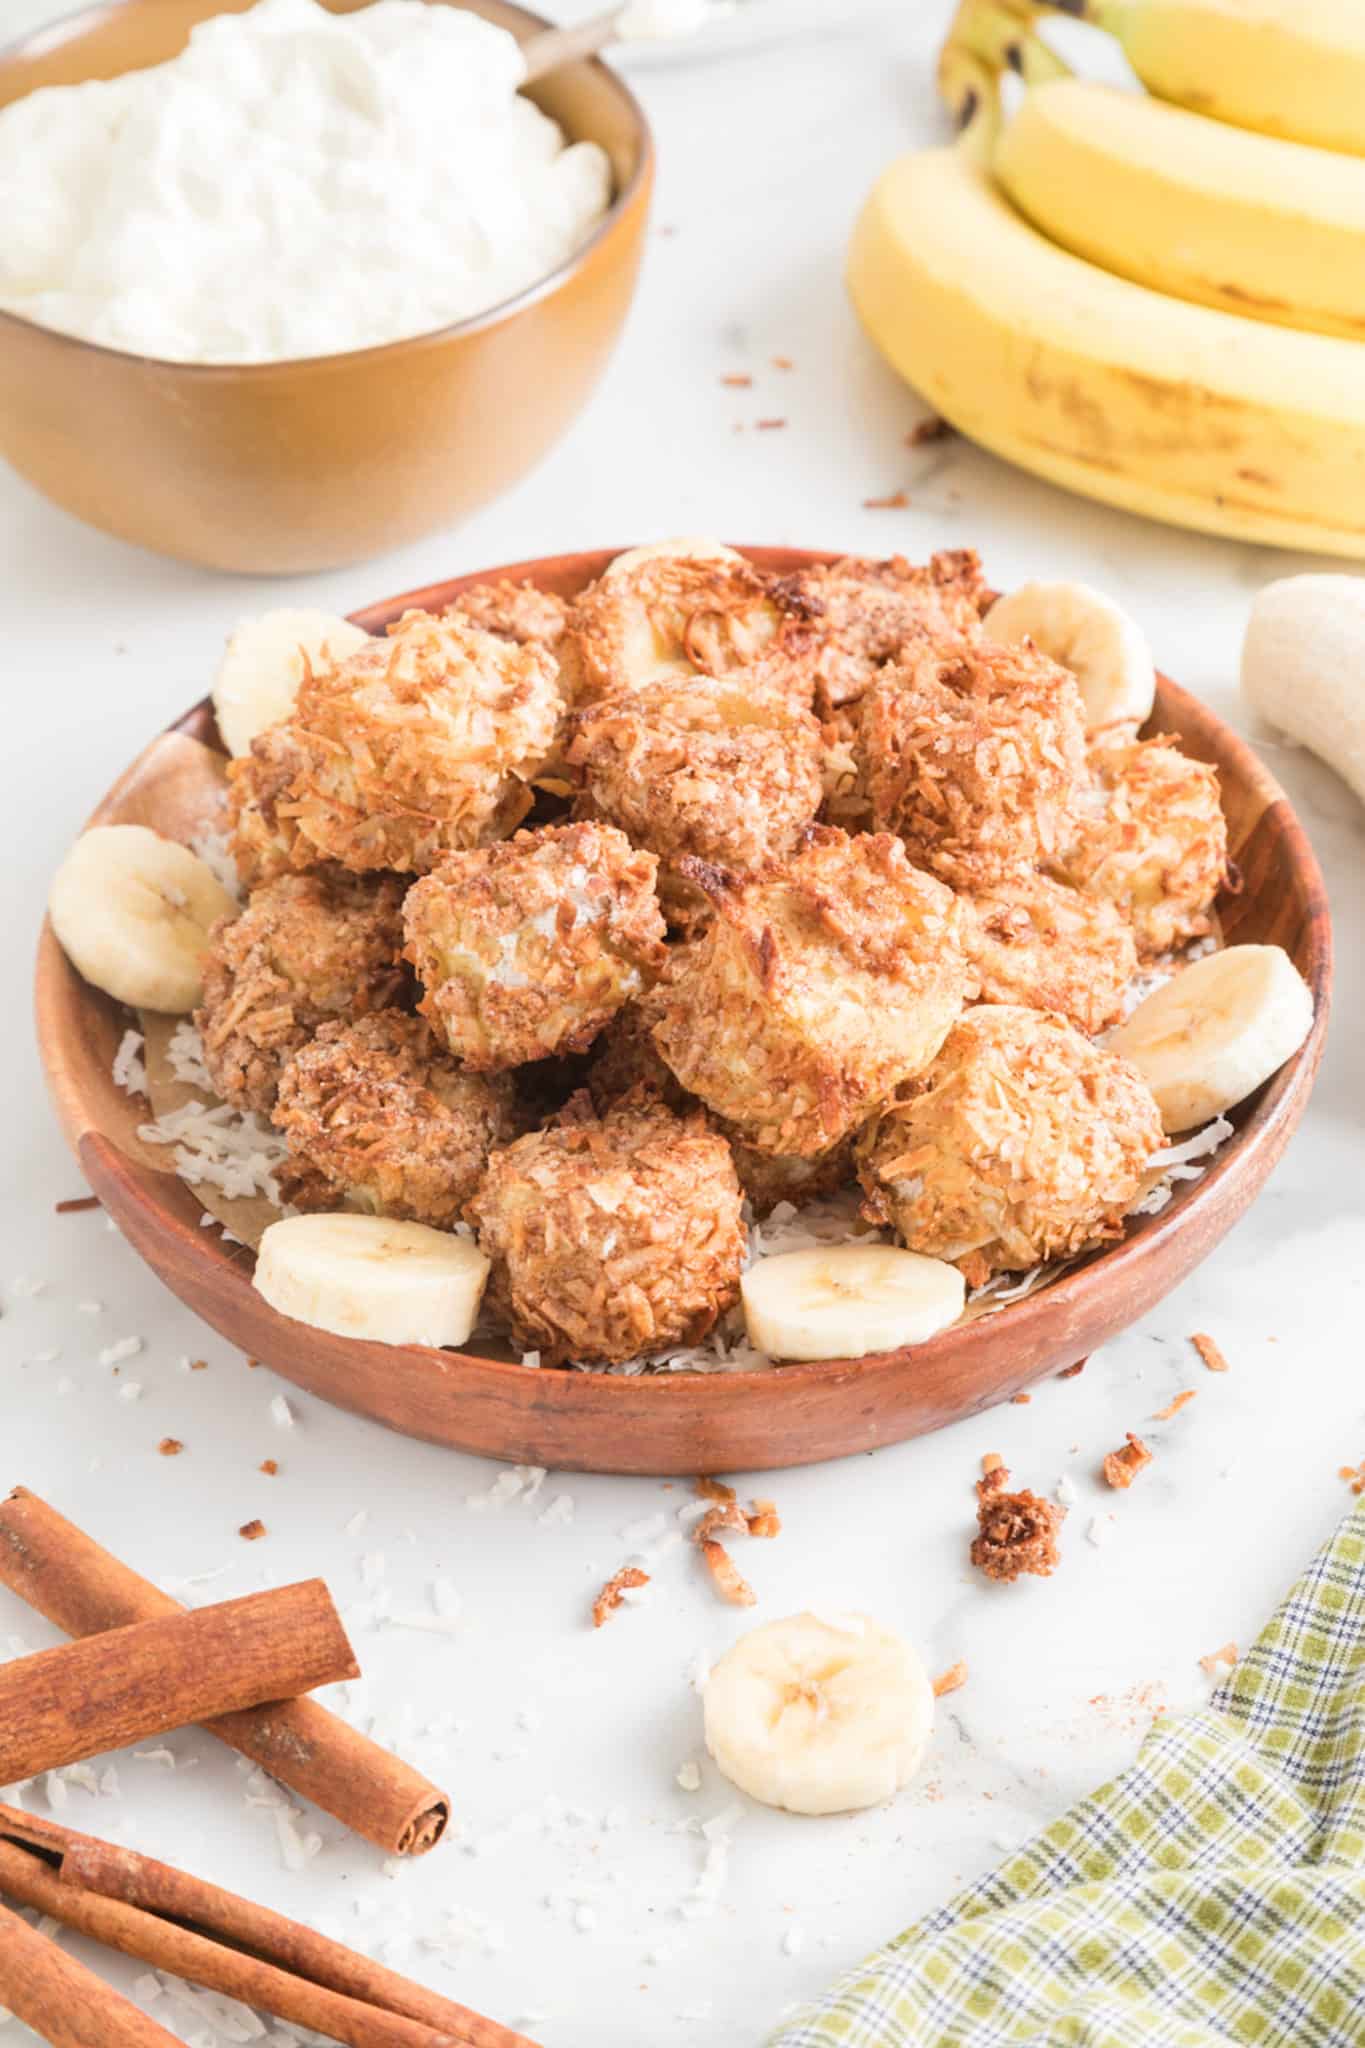 Air fryer banana fritters in a wooden bowl on a white counter.